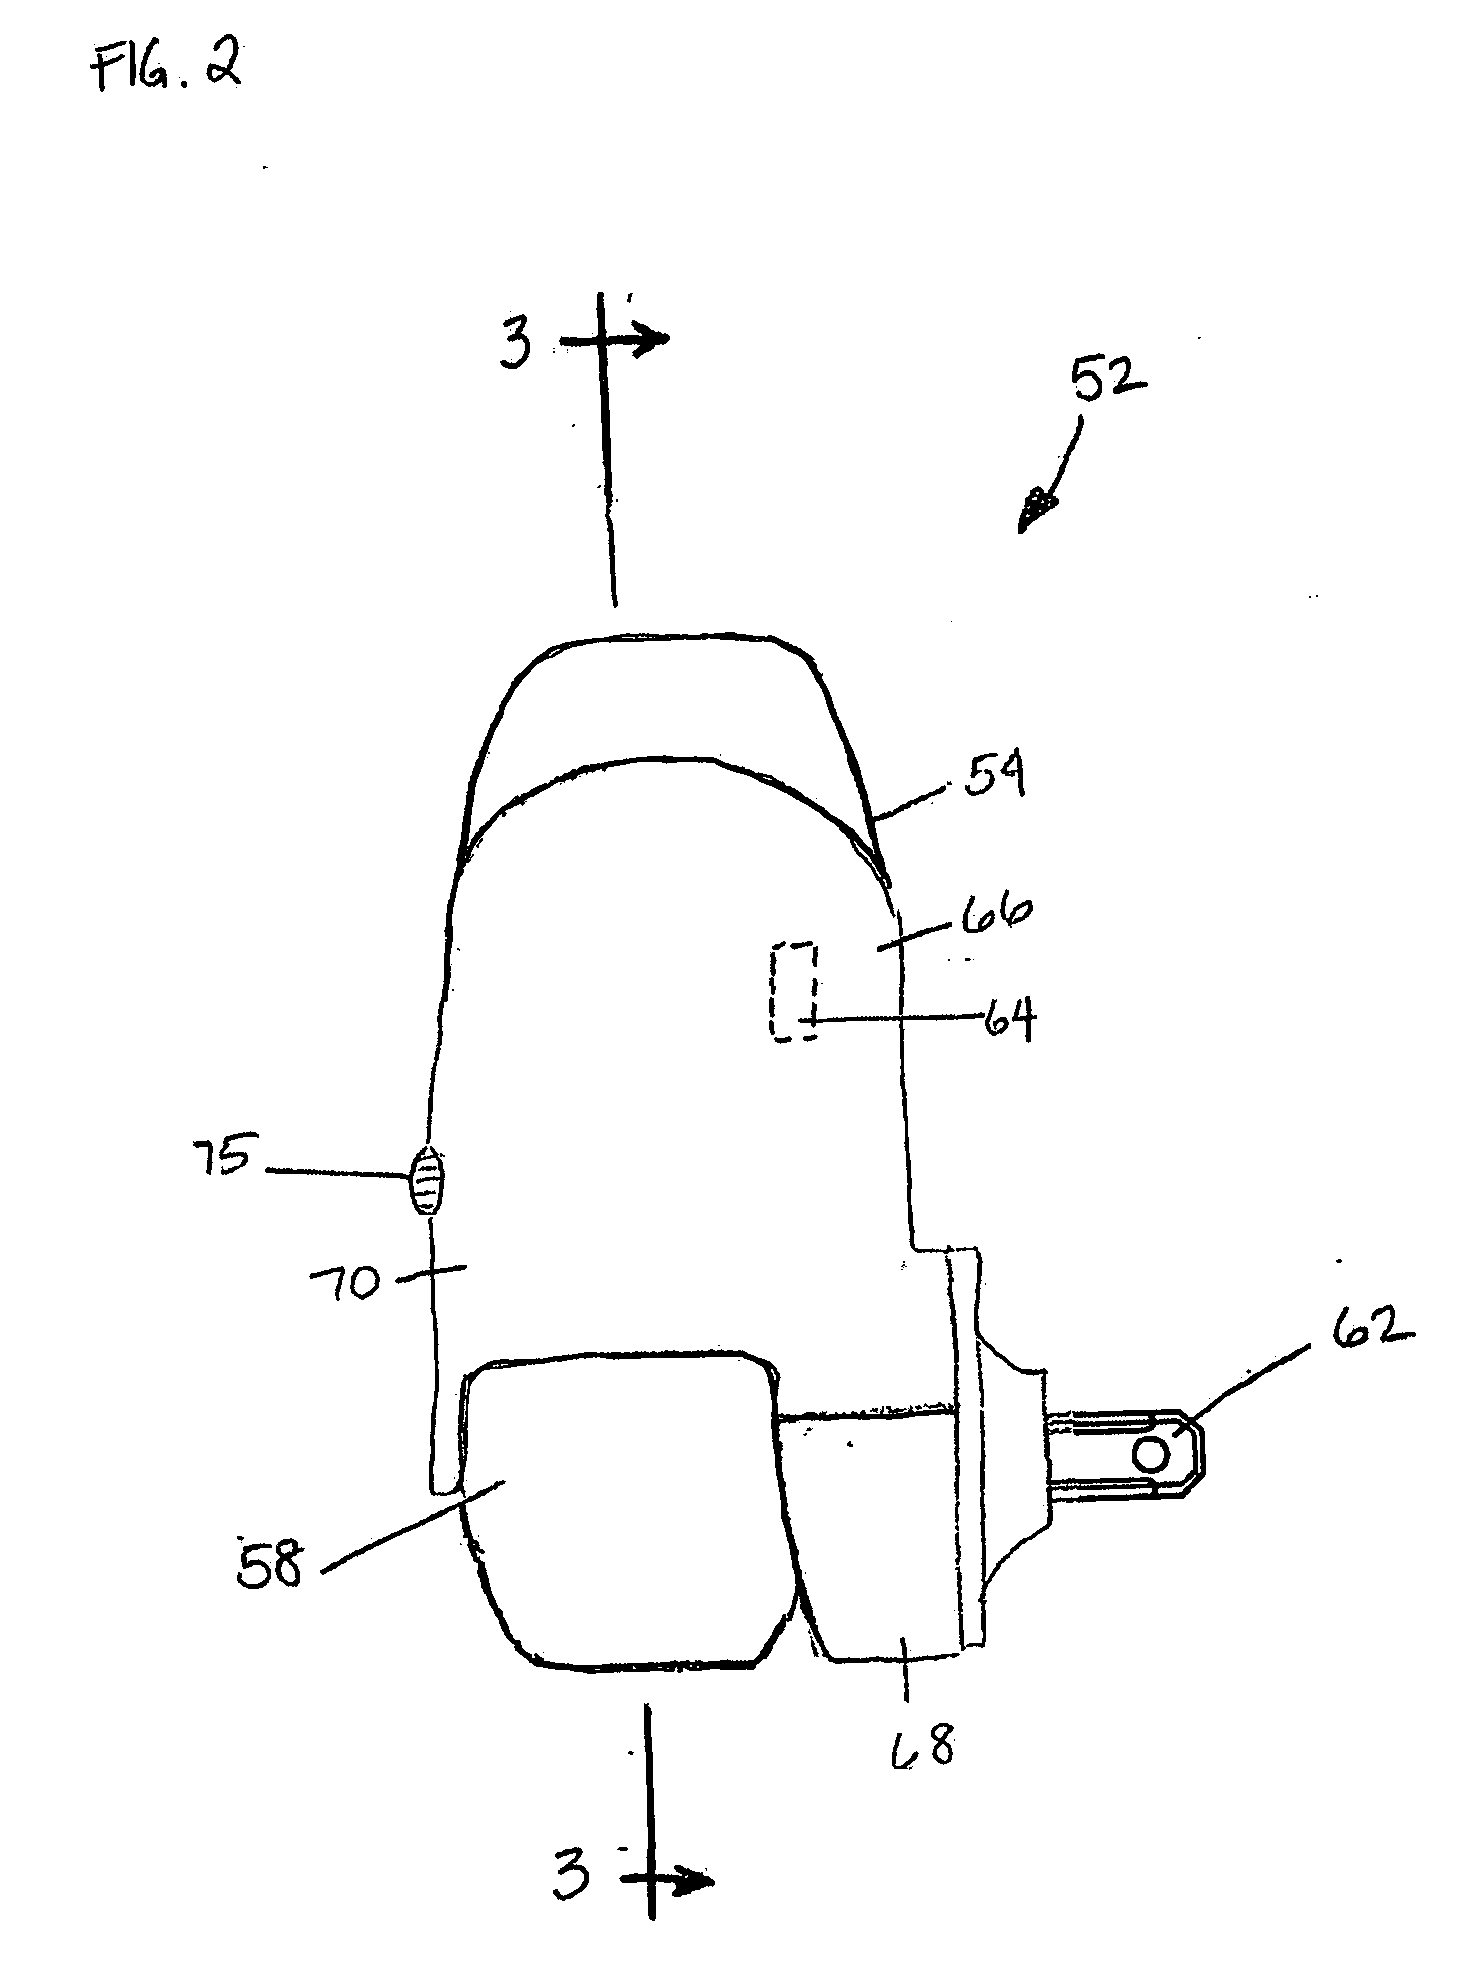 System for detecting a container or contents of the container